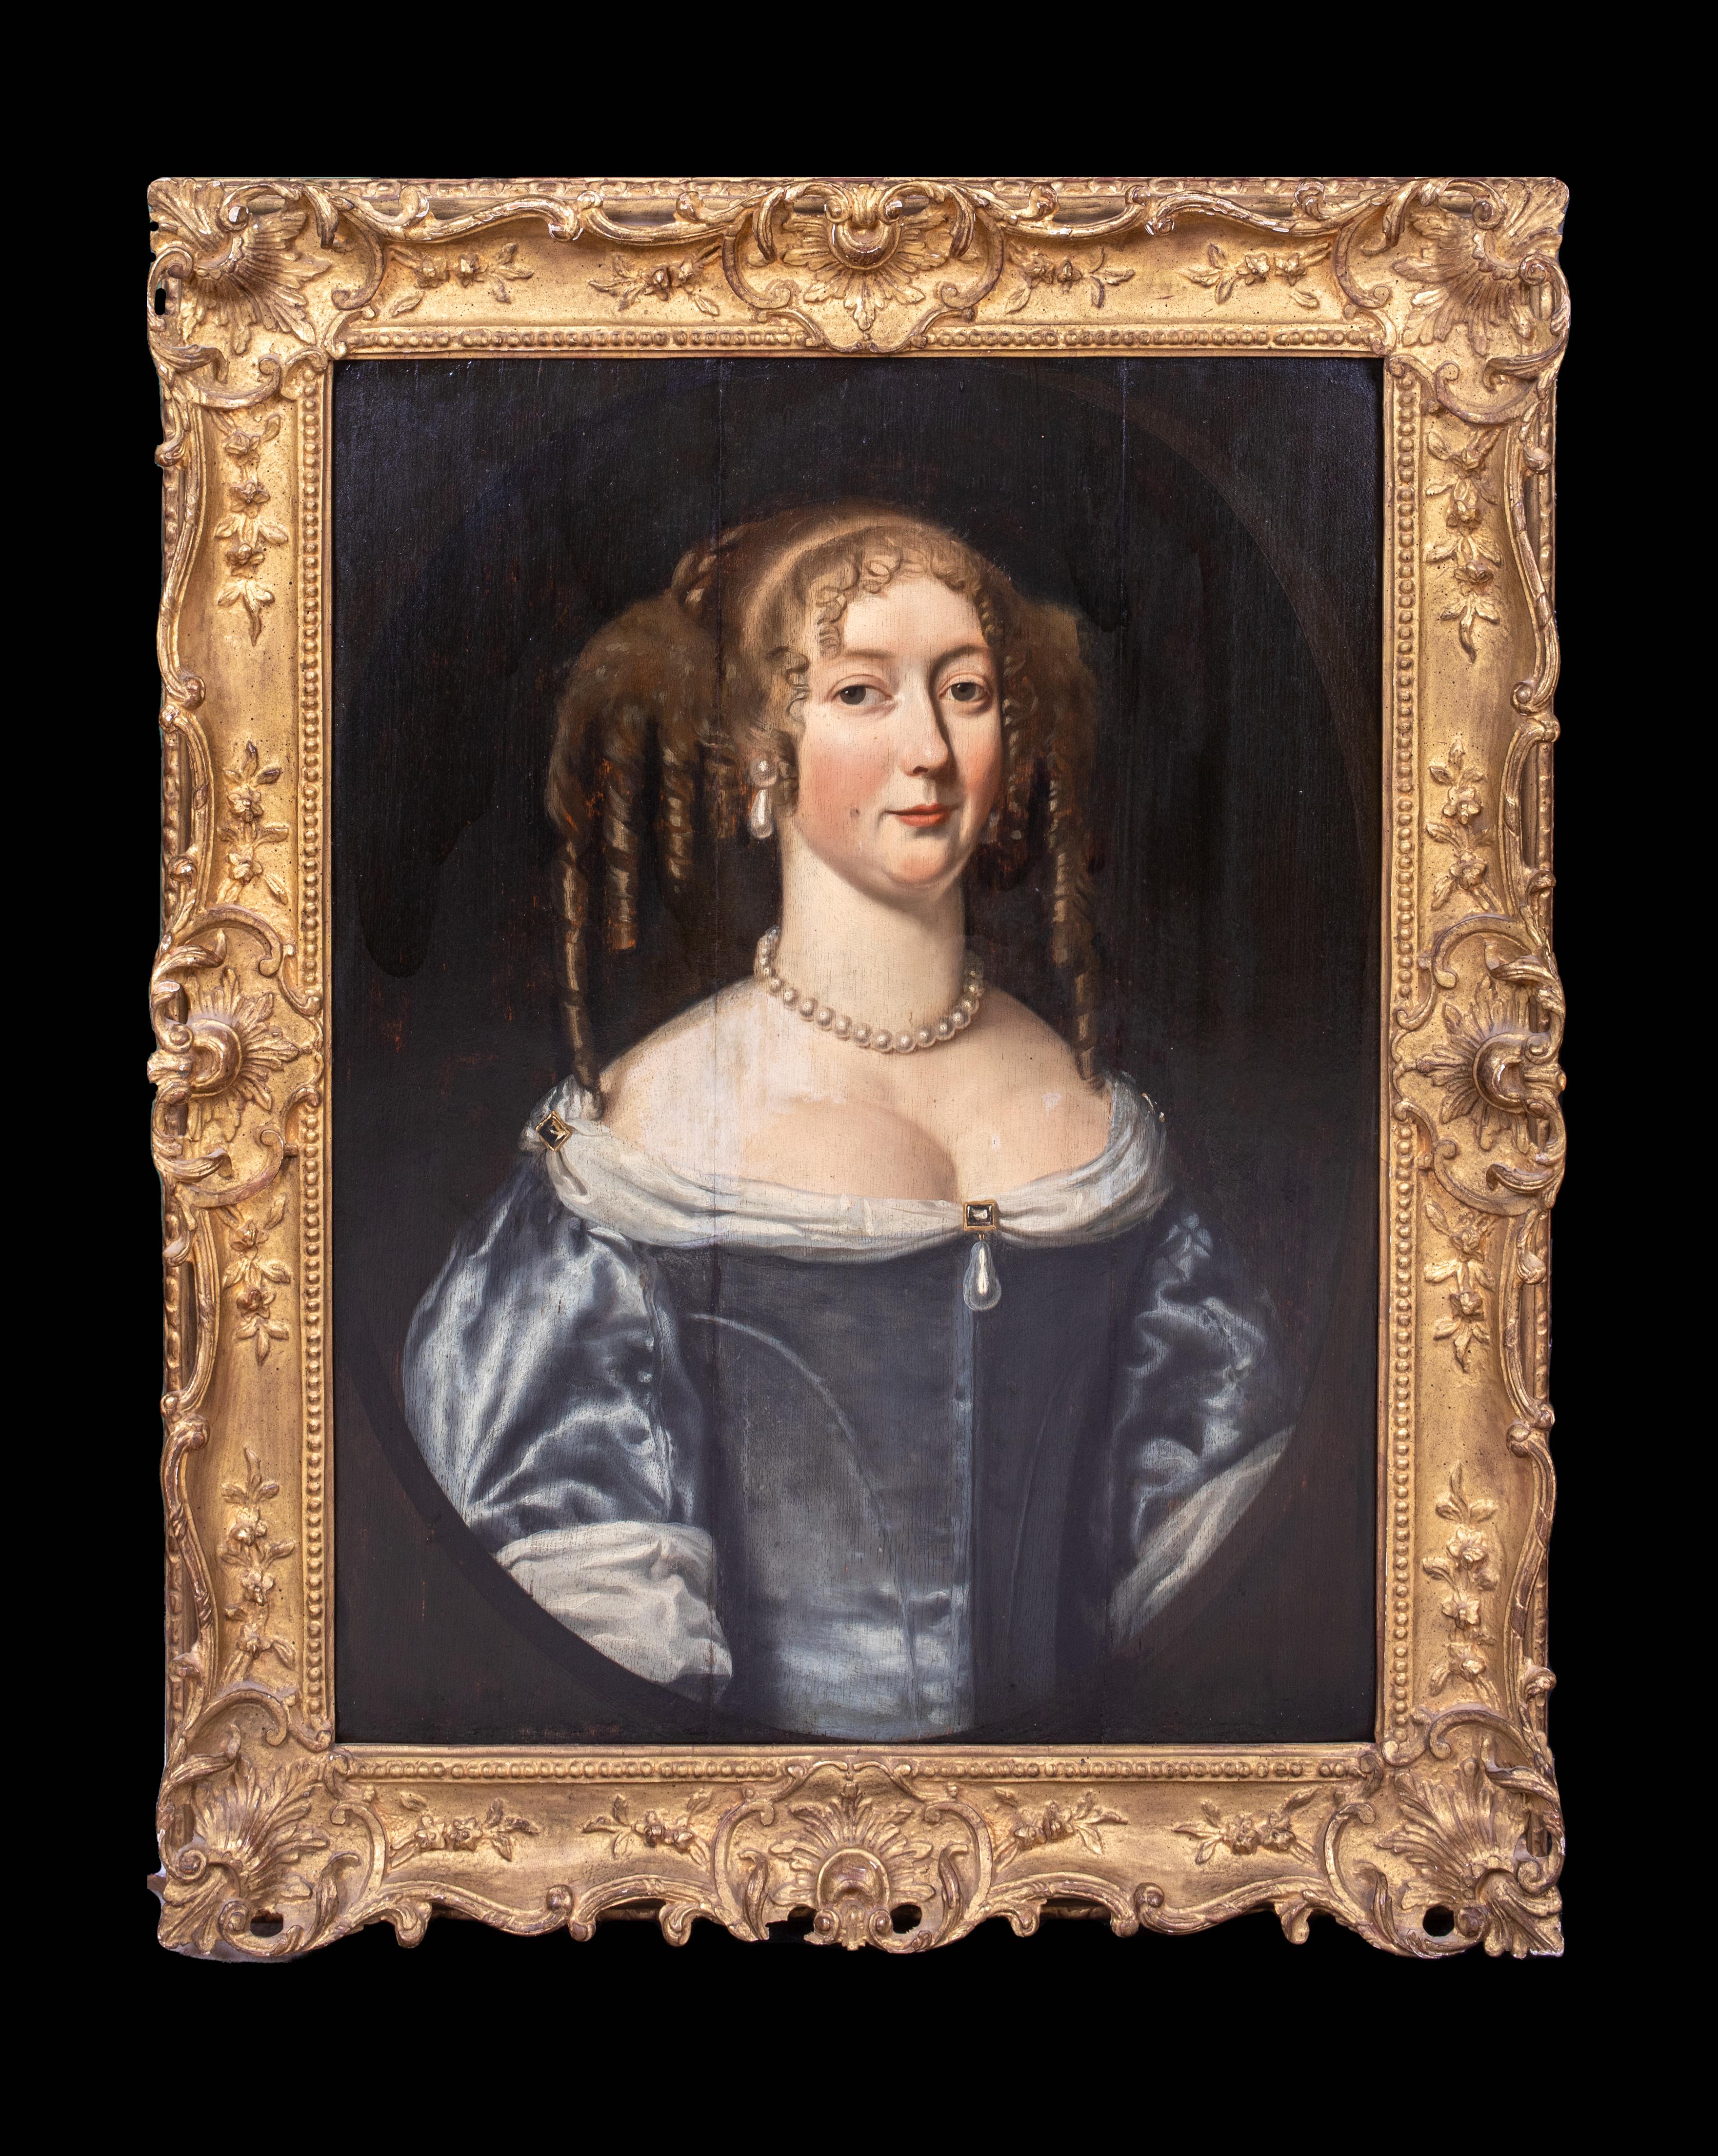 Portrait Of Elizabeth Percy, Countess of Northumberland (1646-1690) 17th Century - Painting by Daniel Mytens